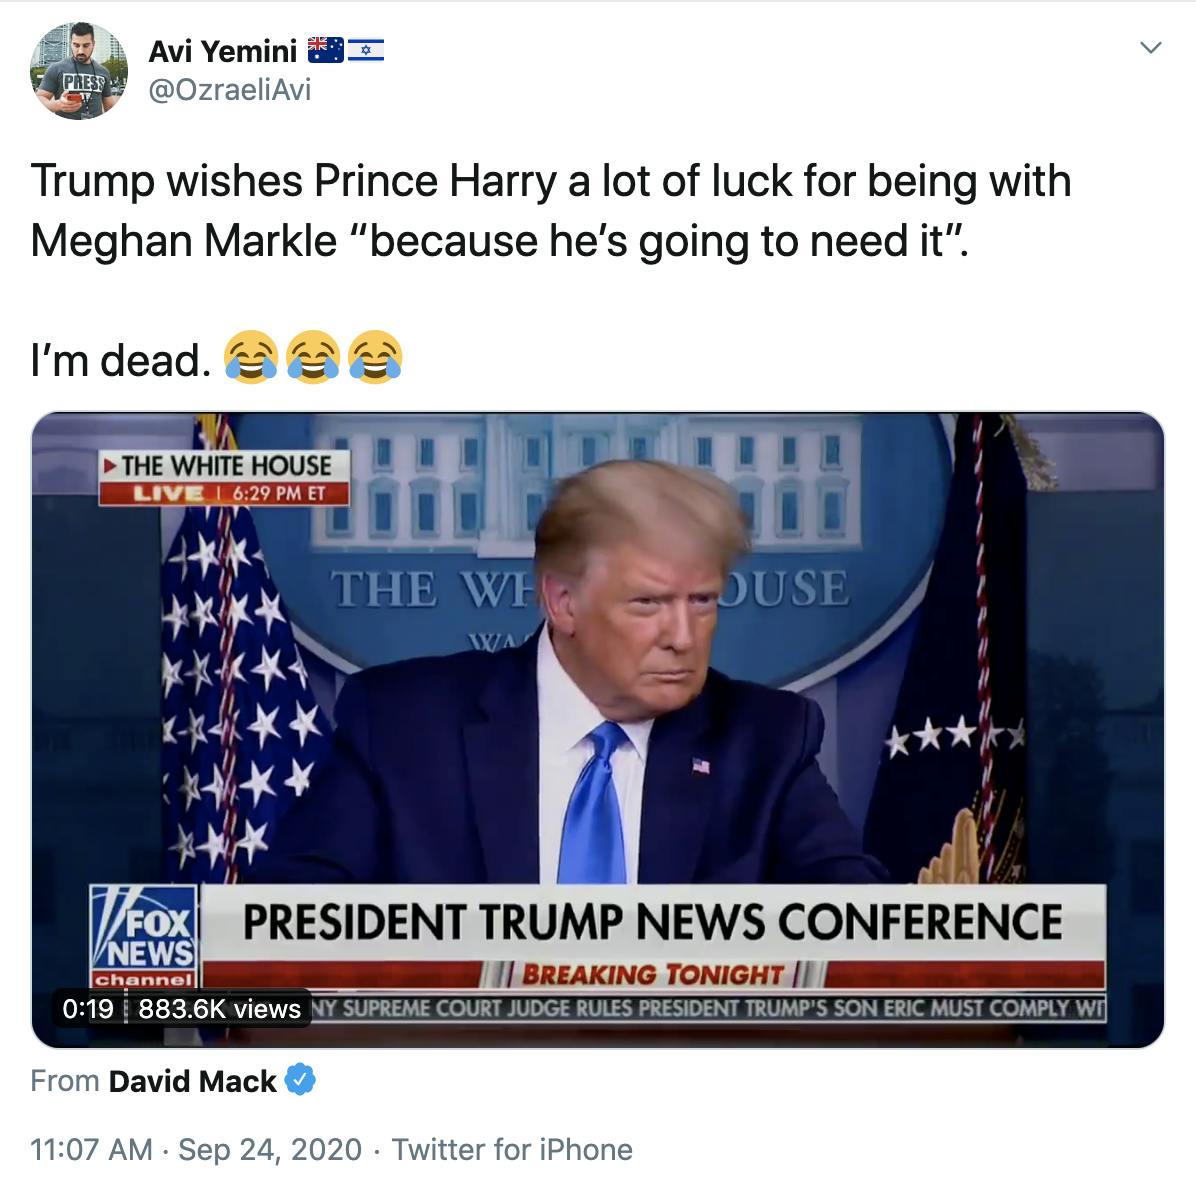 Trump wishes Prince Harry a lot of luck for being with Meghan Markle “because he’s going to need it”.  I’m dead. Face with tears of joyFace with tears of joyFace with tears of joy